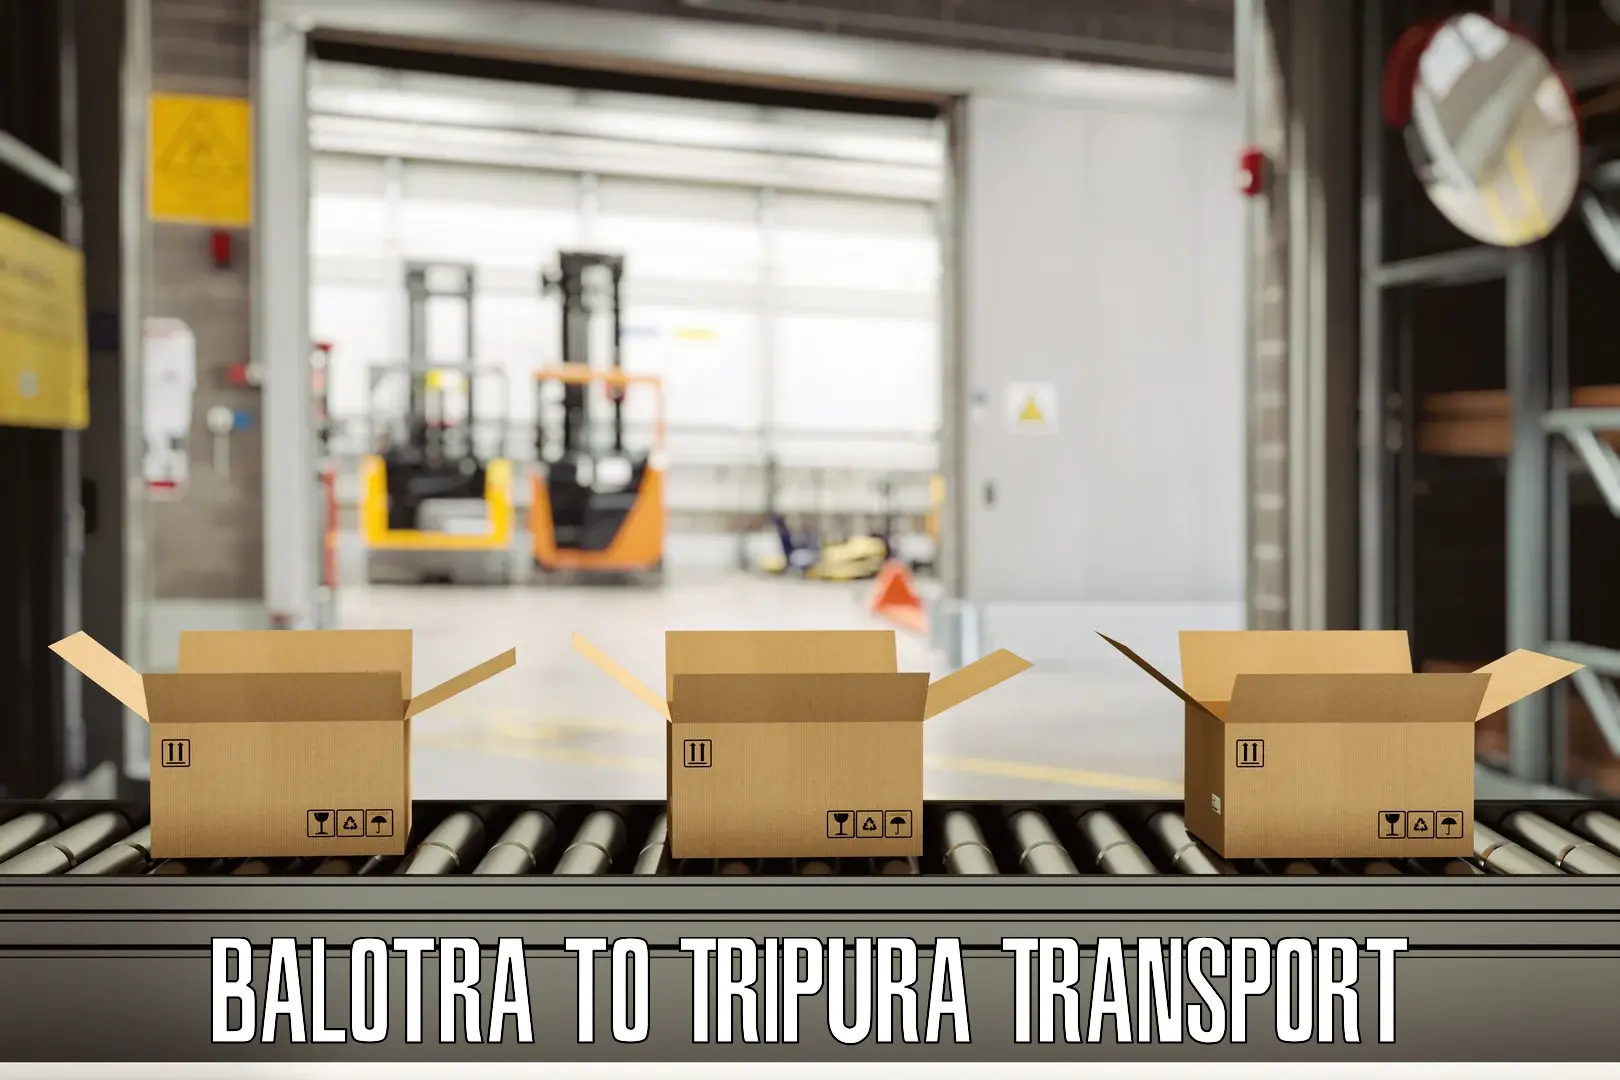 Commercial transport service Balotra to Tripura